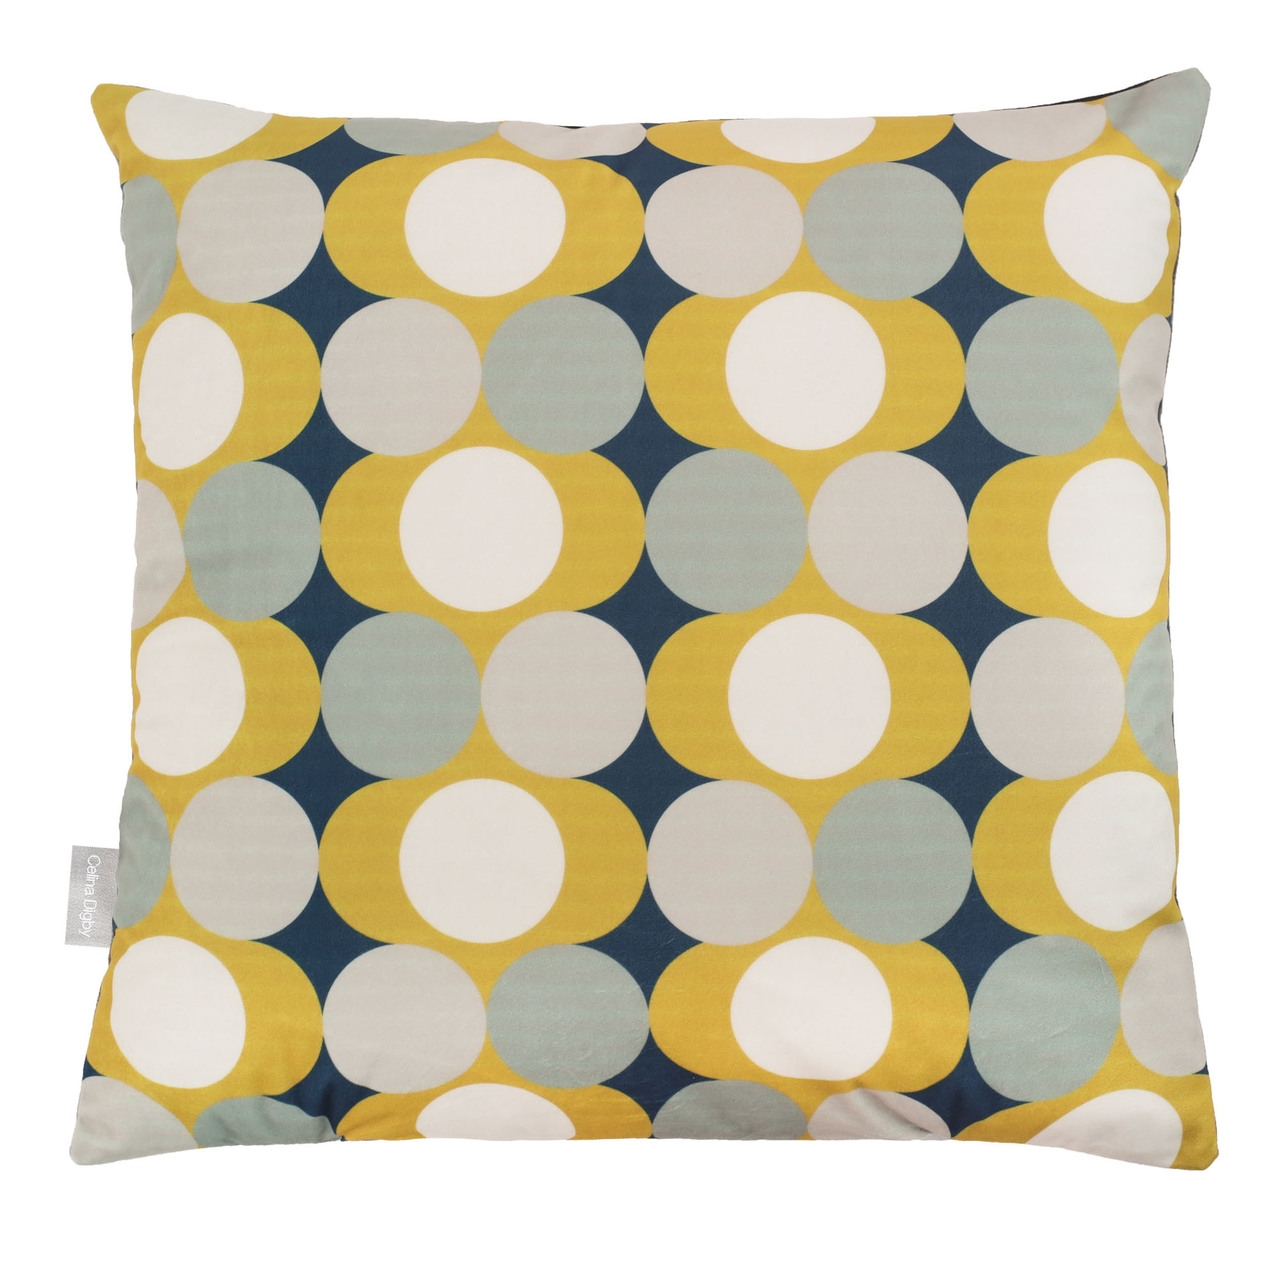 Celina Digby Luxury Opulent Velvet Cushion – Dot Drops Mustard Available in 2 Sizes Extra Large (55cm x 55cm) Feather Filling